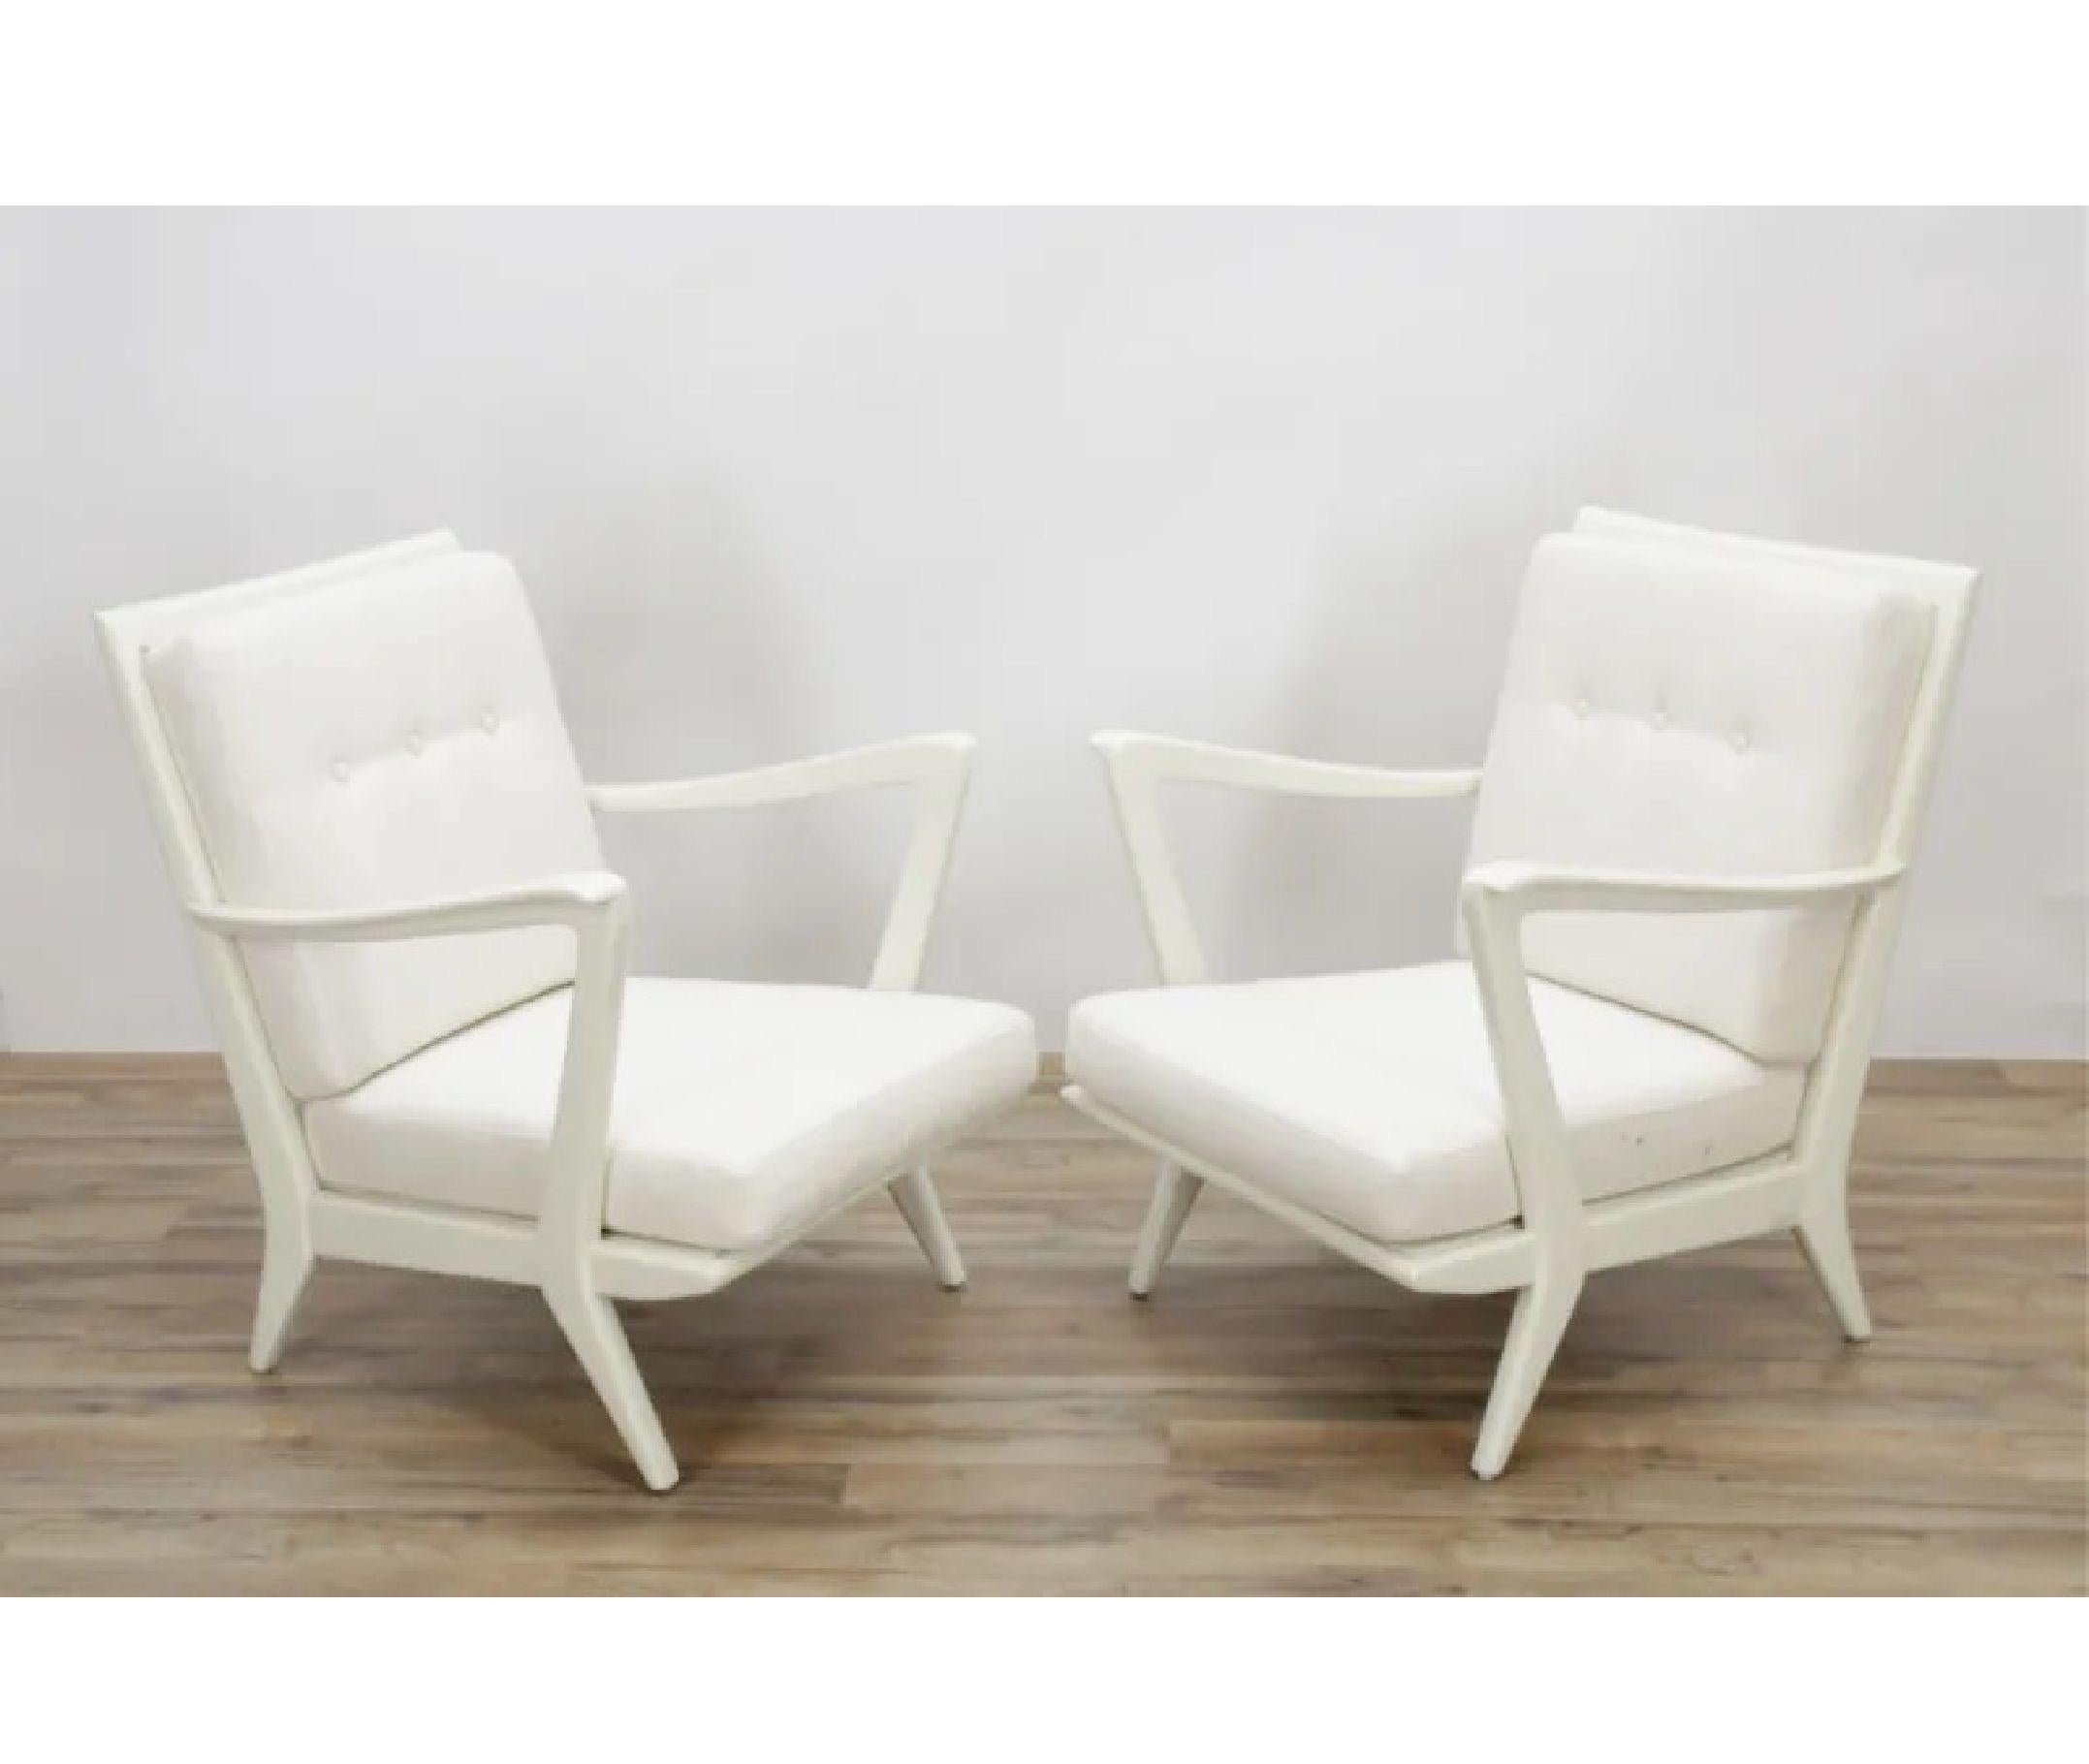 Italian Gio Ponti Model 516 Pair of Lounge Chairs, Cream White Painted Walnut, 1950 For Sale